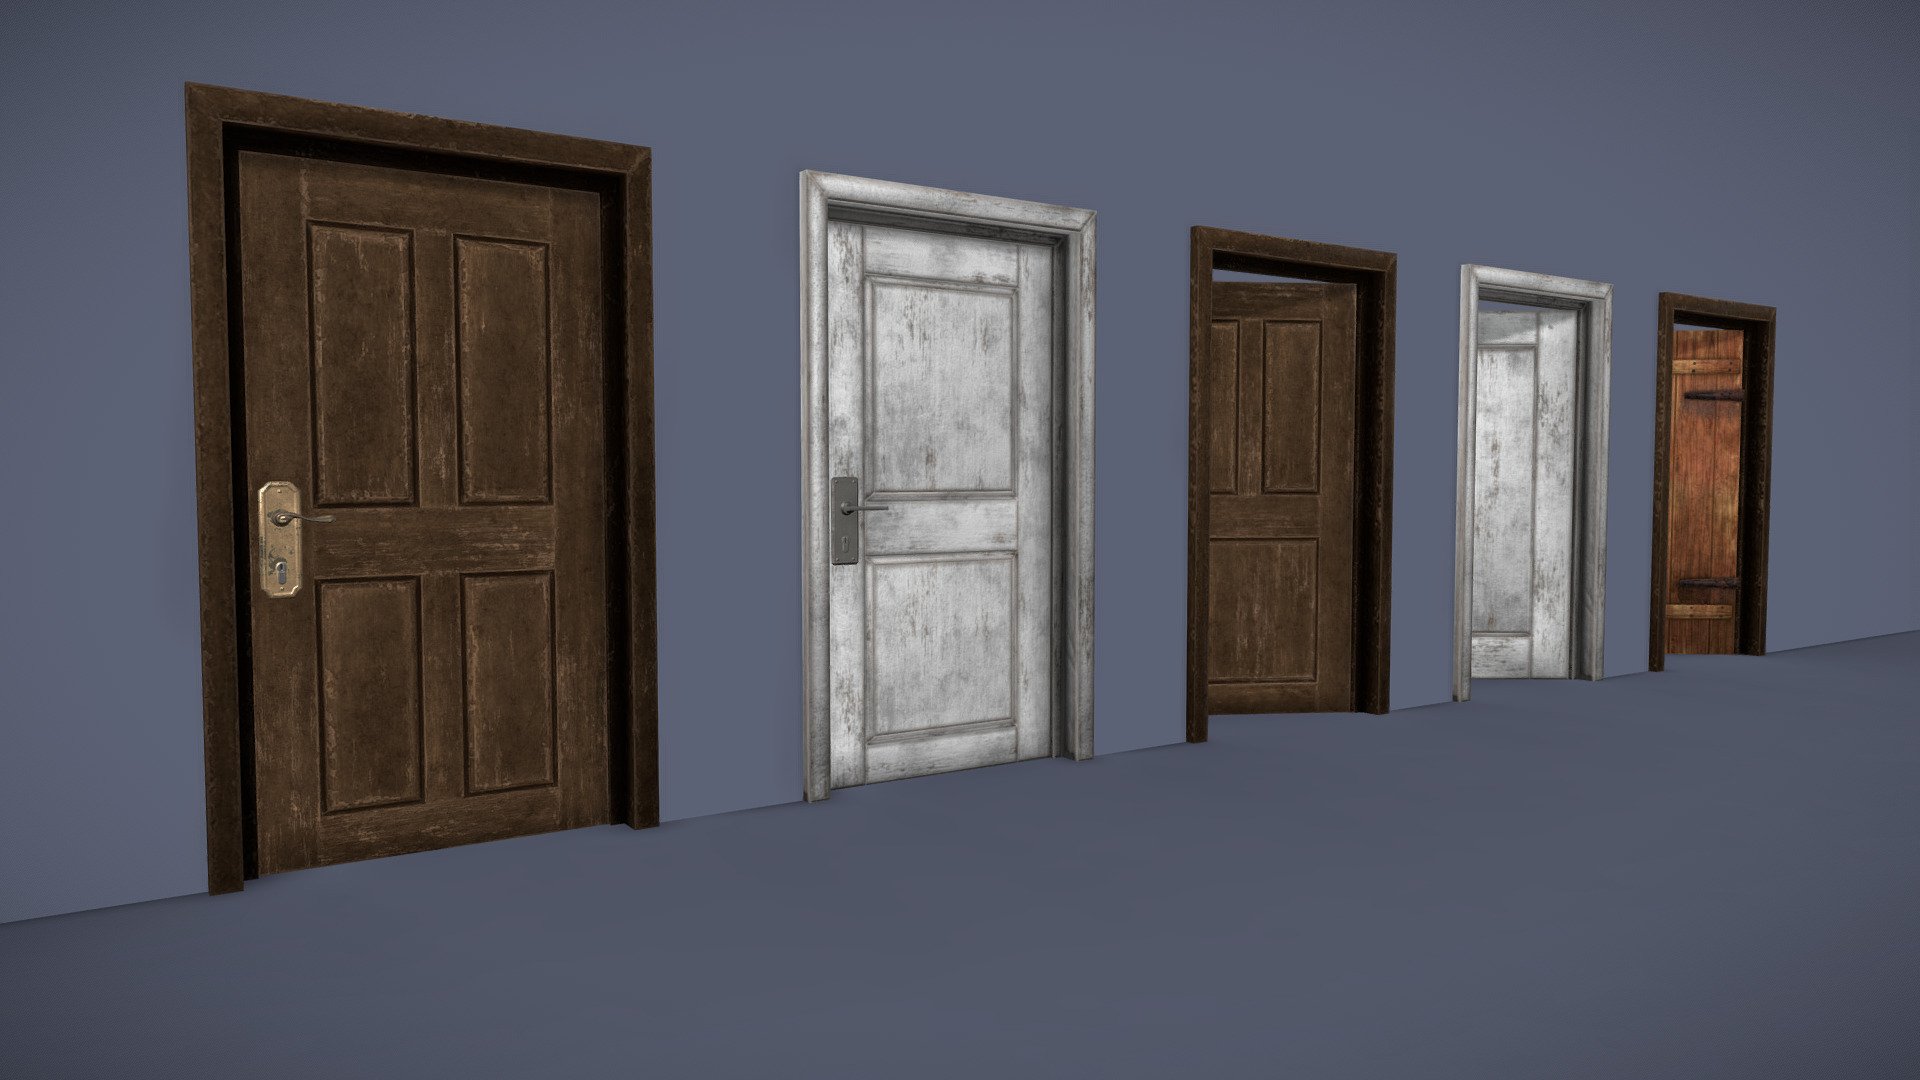 Set of door models initially created for a personal project. Textures are atlased, with painted and polished wood versions having their own sets. Frame models take from the existing materials to retain stylistic consistency as well as saving on draw calls. Also includes modular knobs/handles and plates.

The dimensions of the various modules were designed with modularity in mind. I wanted to be able to slot any door to any frame and any handle onto any door in order to improve efficiency. Additionally in my own Unity implementation, the seperation between the door handles and the plates allow animation using transforms.

Modelled using Blender, textured in Substance Painter, with additional processing in Substance Designer and Photoshop.

On purchase includes a .blend file. FBX of each modular element, and texture sets (specular and metallic, but tweaking may be needed regardless) 3d model